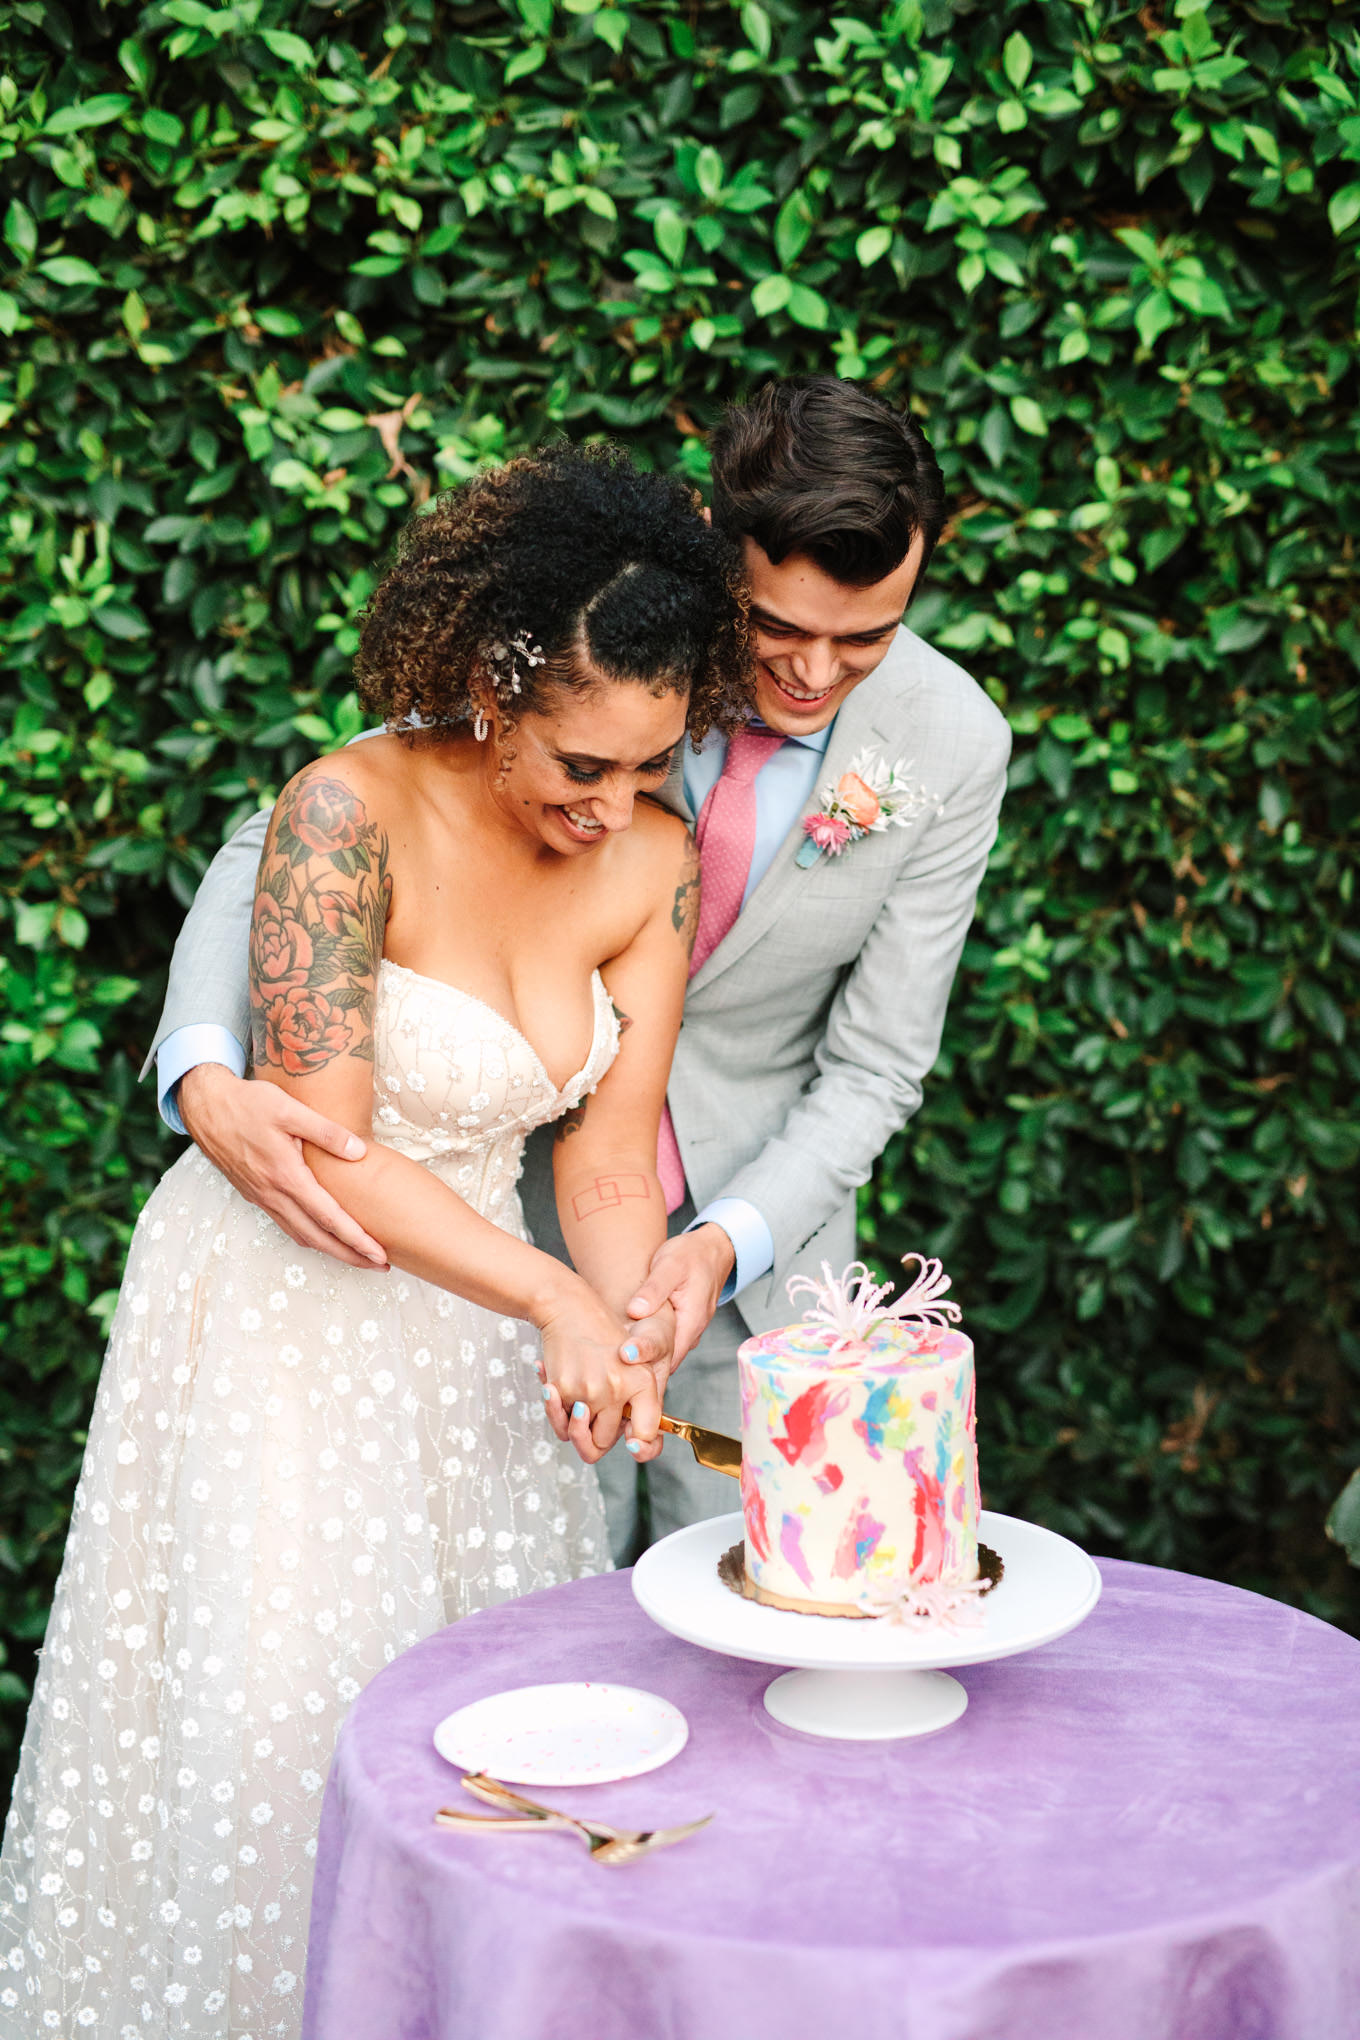 Bride and groom cutting colorful watercolor taro cake by Flouring LA | Colorful pop-up micro wedding at The Ruby Street Los Angeles featured on Green Wedding Shoes | Colorful and elevated photography for fun-loving couples in Southern California | #colorfulwedding #popupwedding #weddingphotography #microwedding Source: Mary Costa Photography | Los Angeles